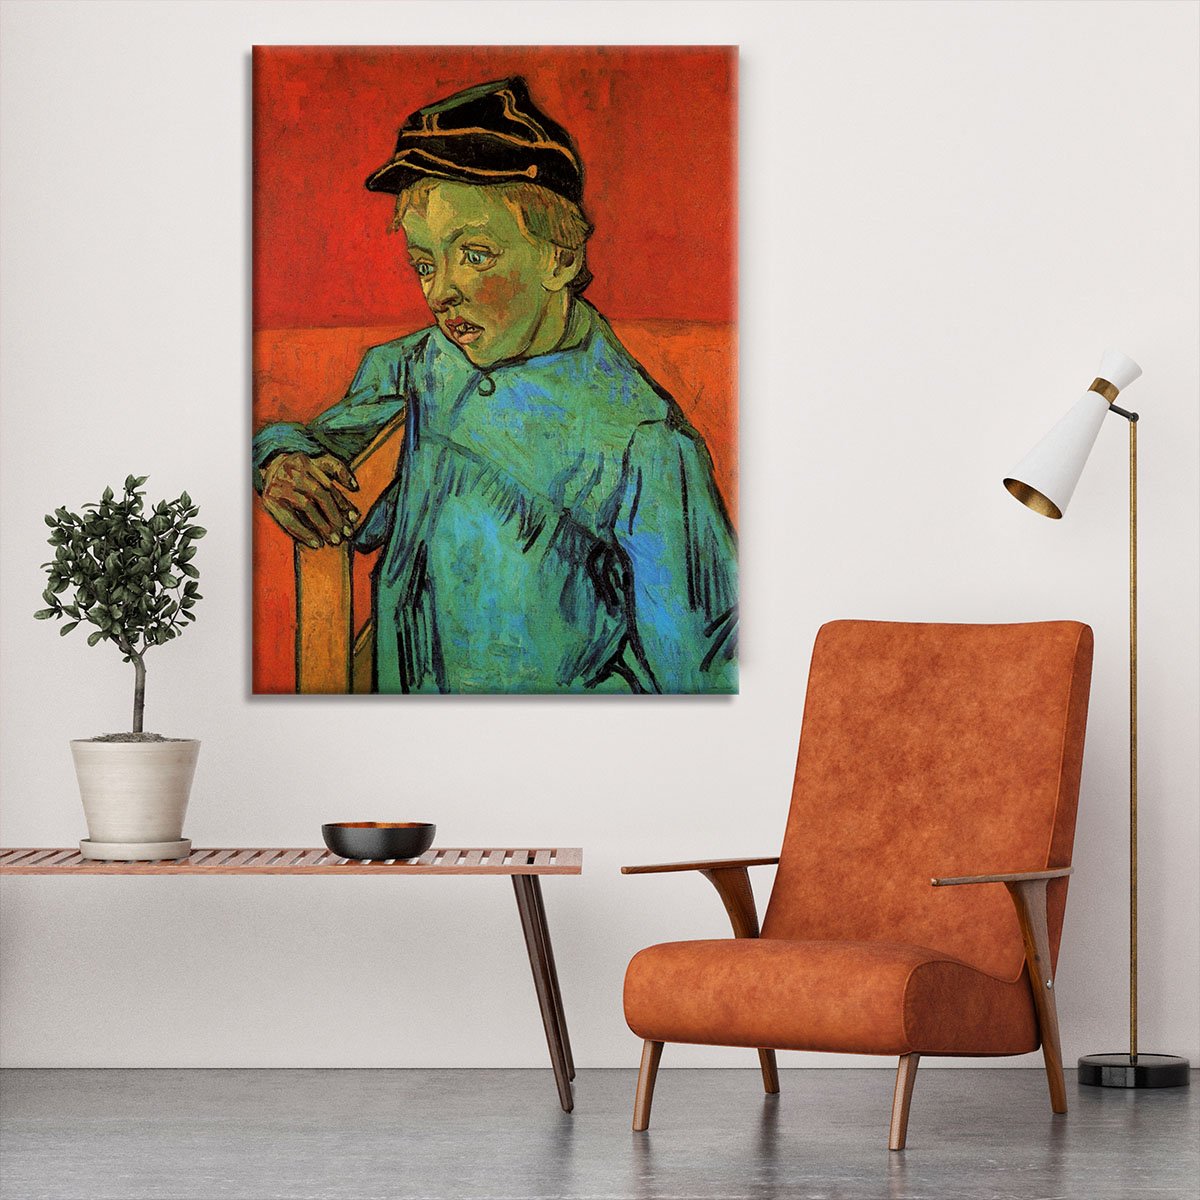 The Schoolboy Camille Roulin by Van Gogh Canvas Print or Poster